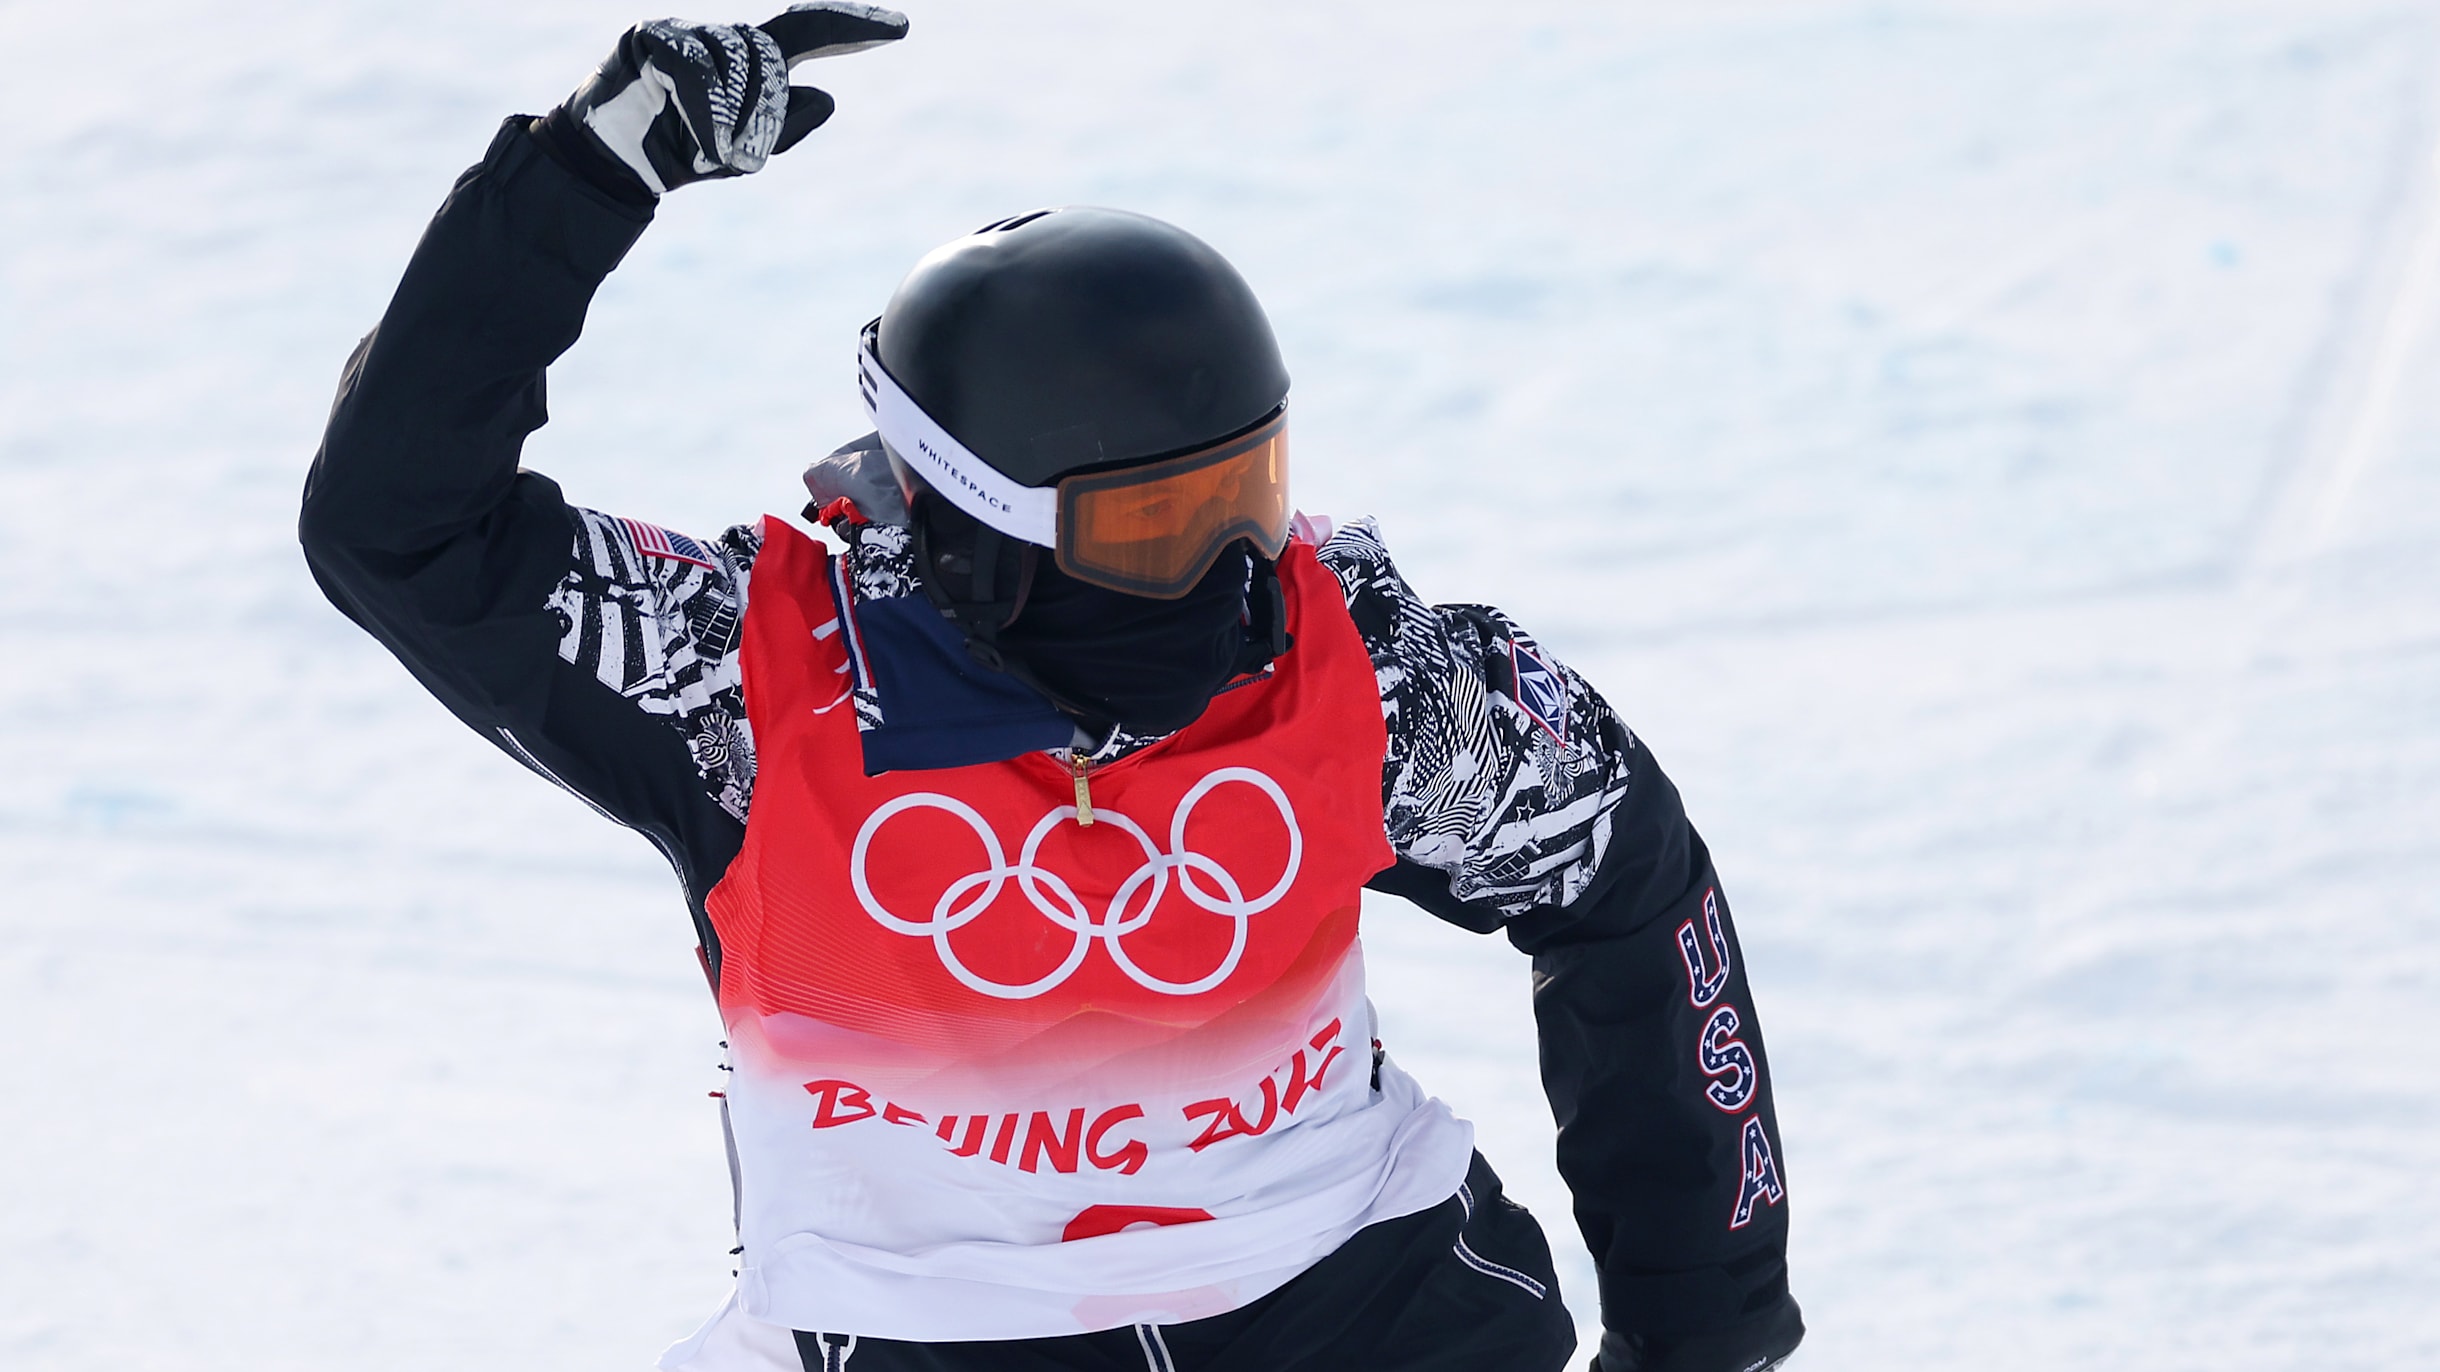 Shaun White says 2022 Olympics will be his final competition